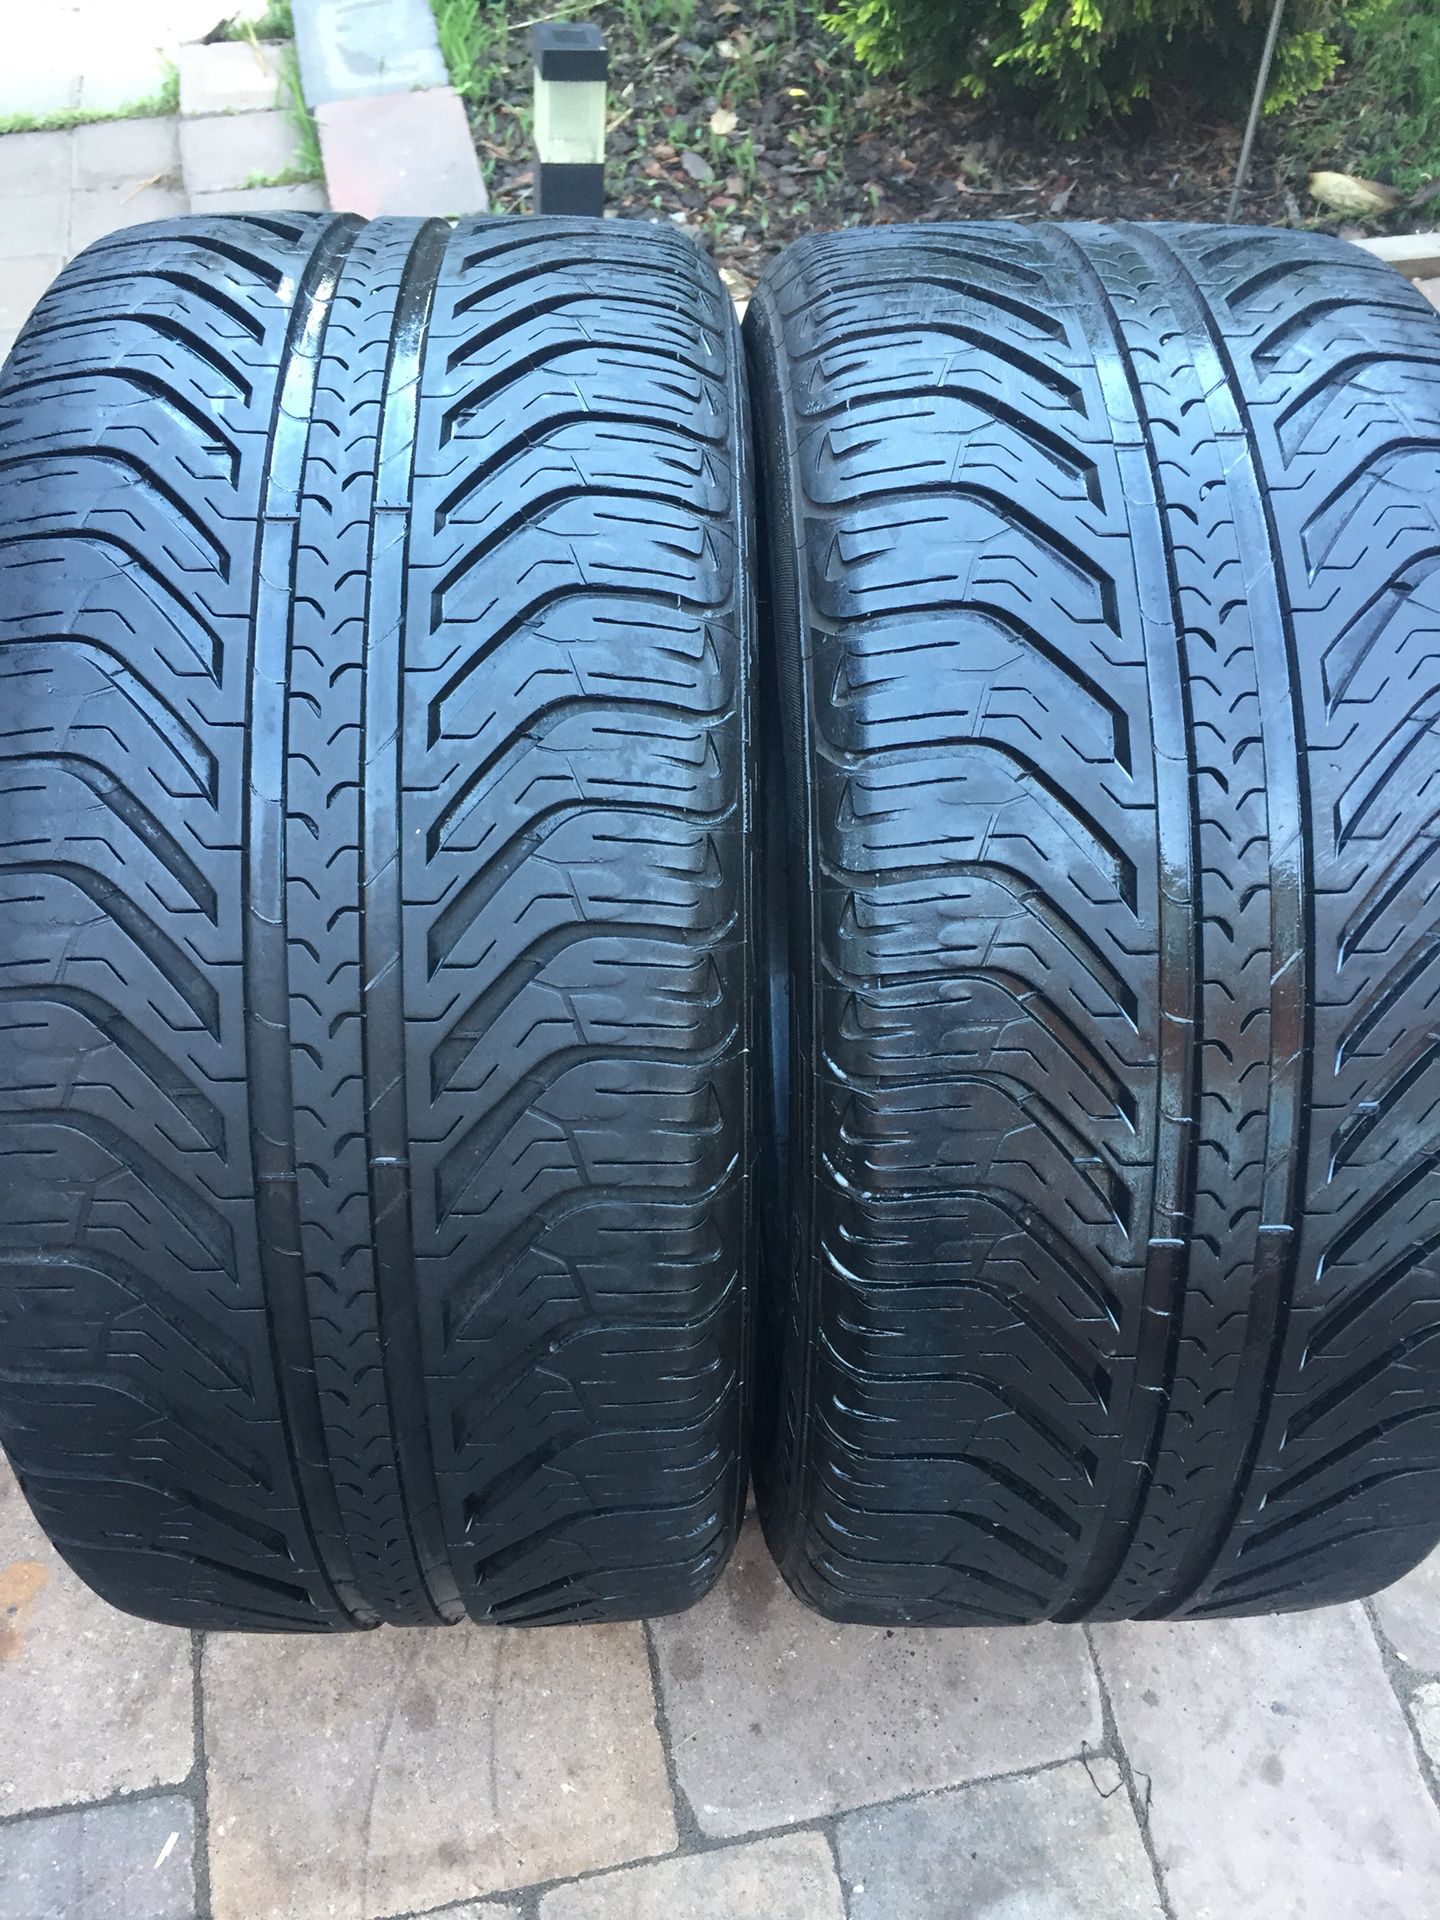 245 40 17 set of 2 tires Michelin sport